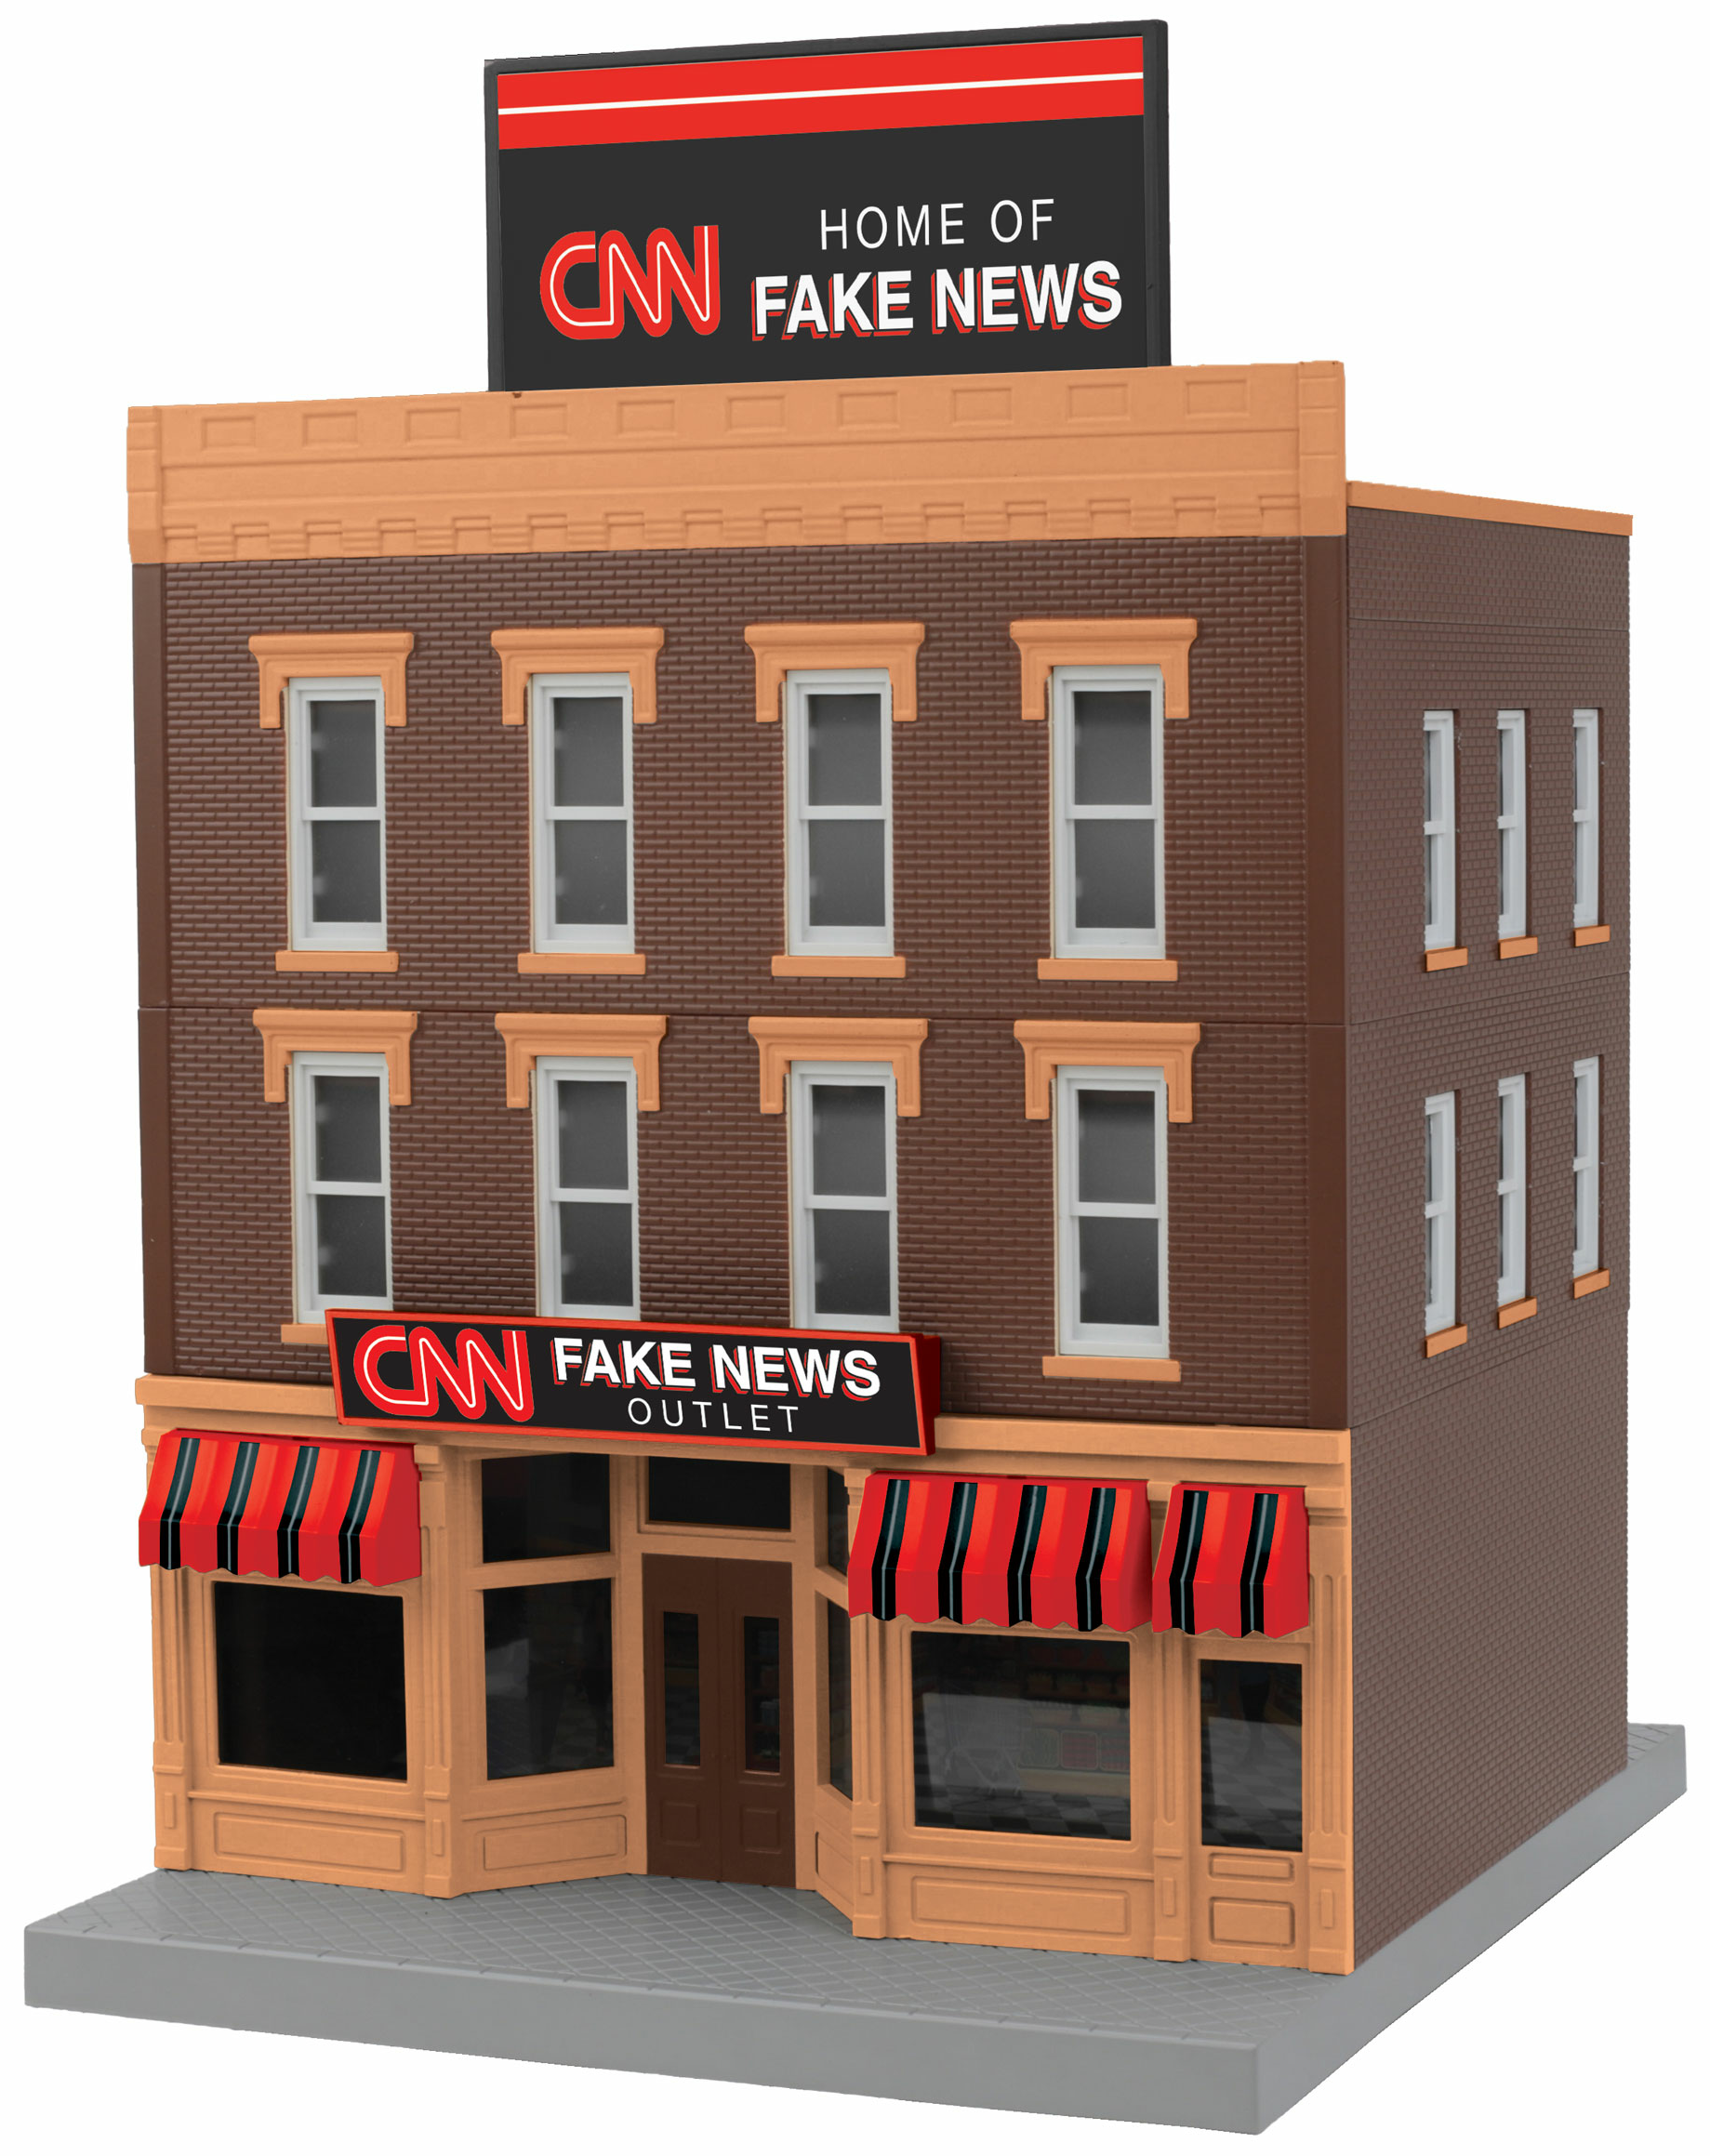 3-Story City Building 1 - CNN Fake News Outlet image